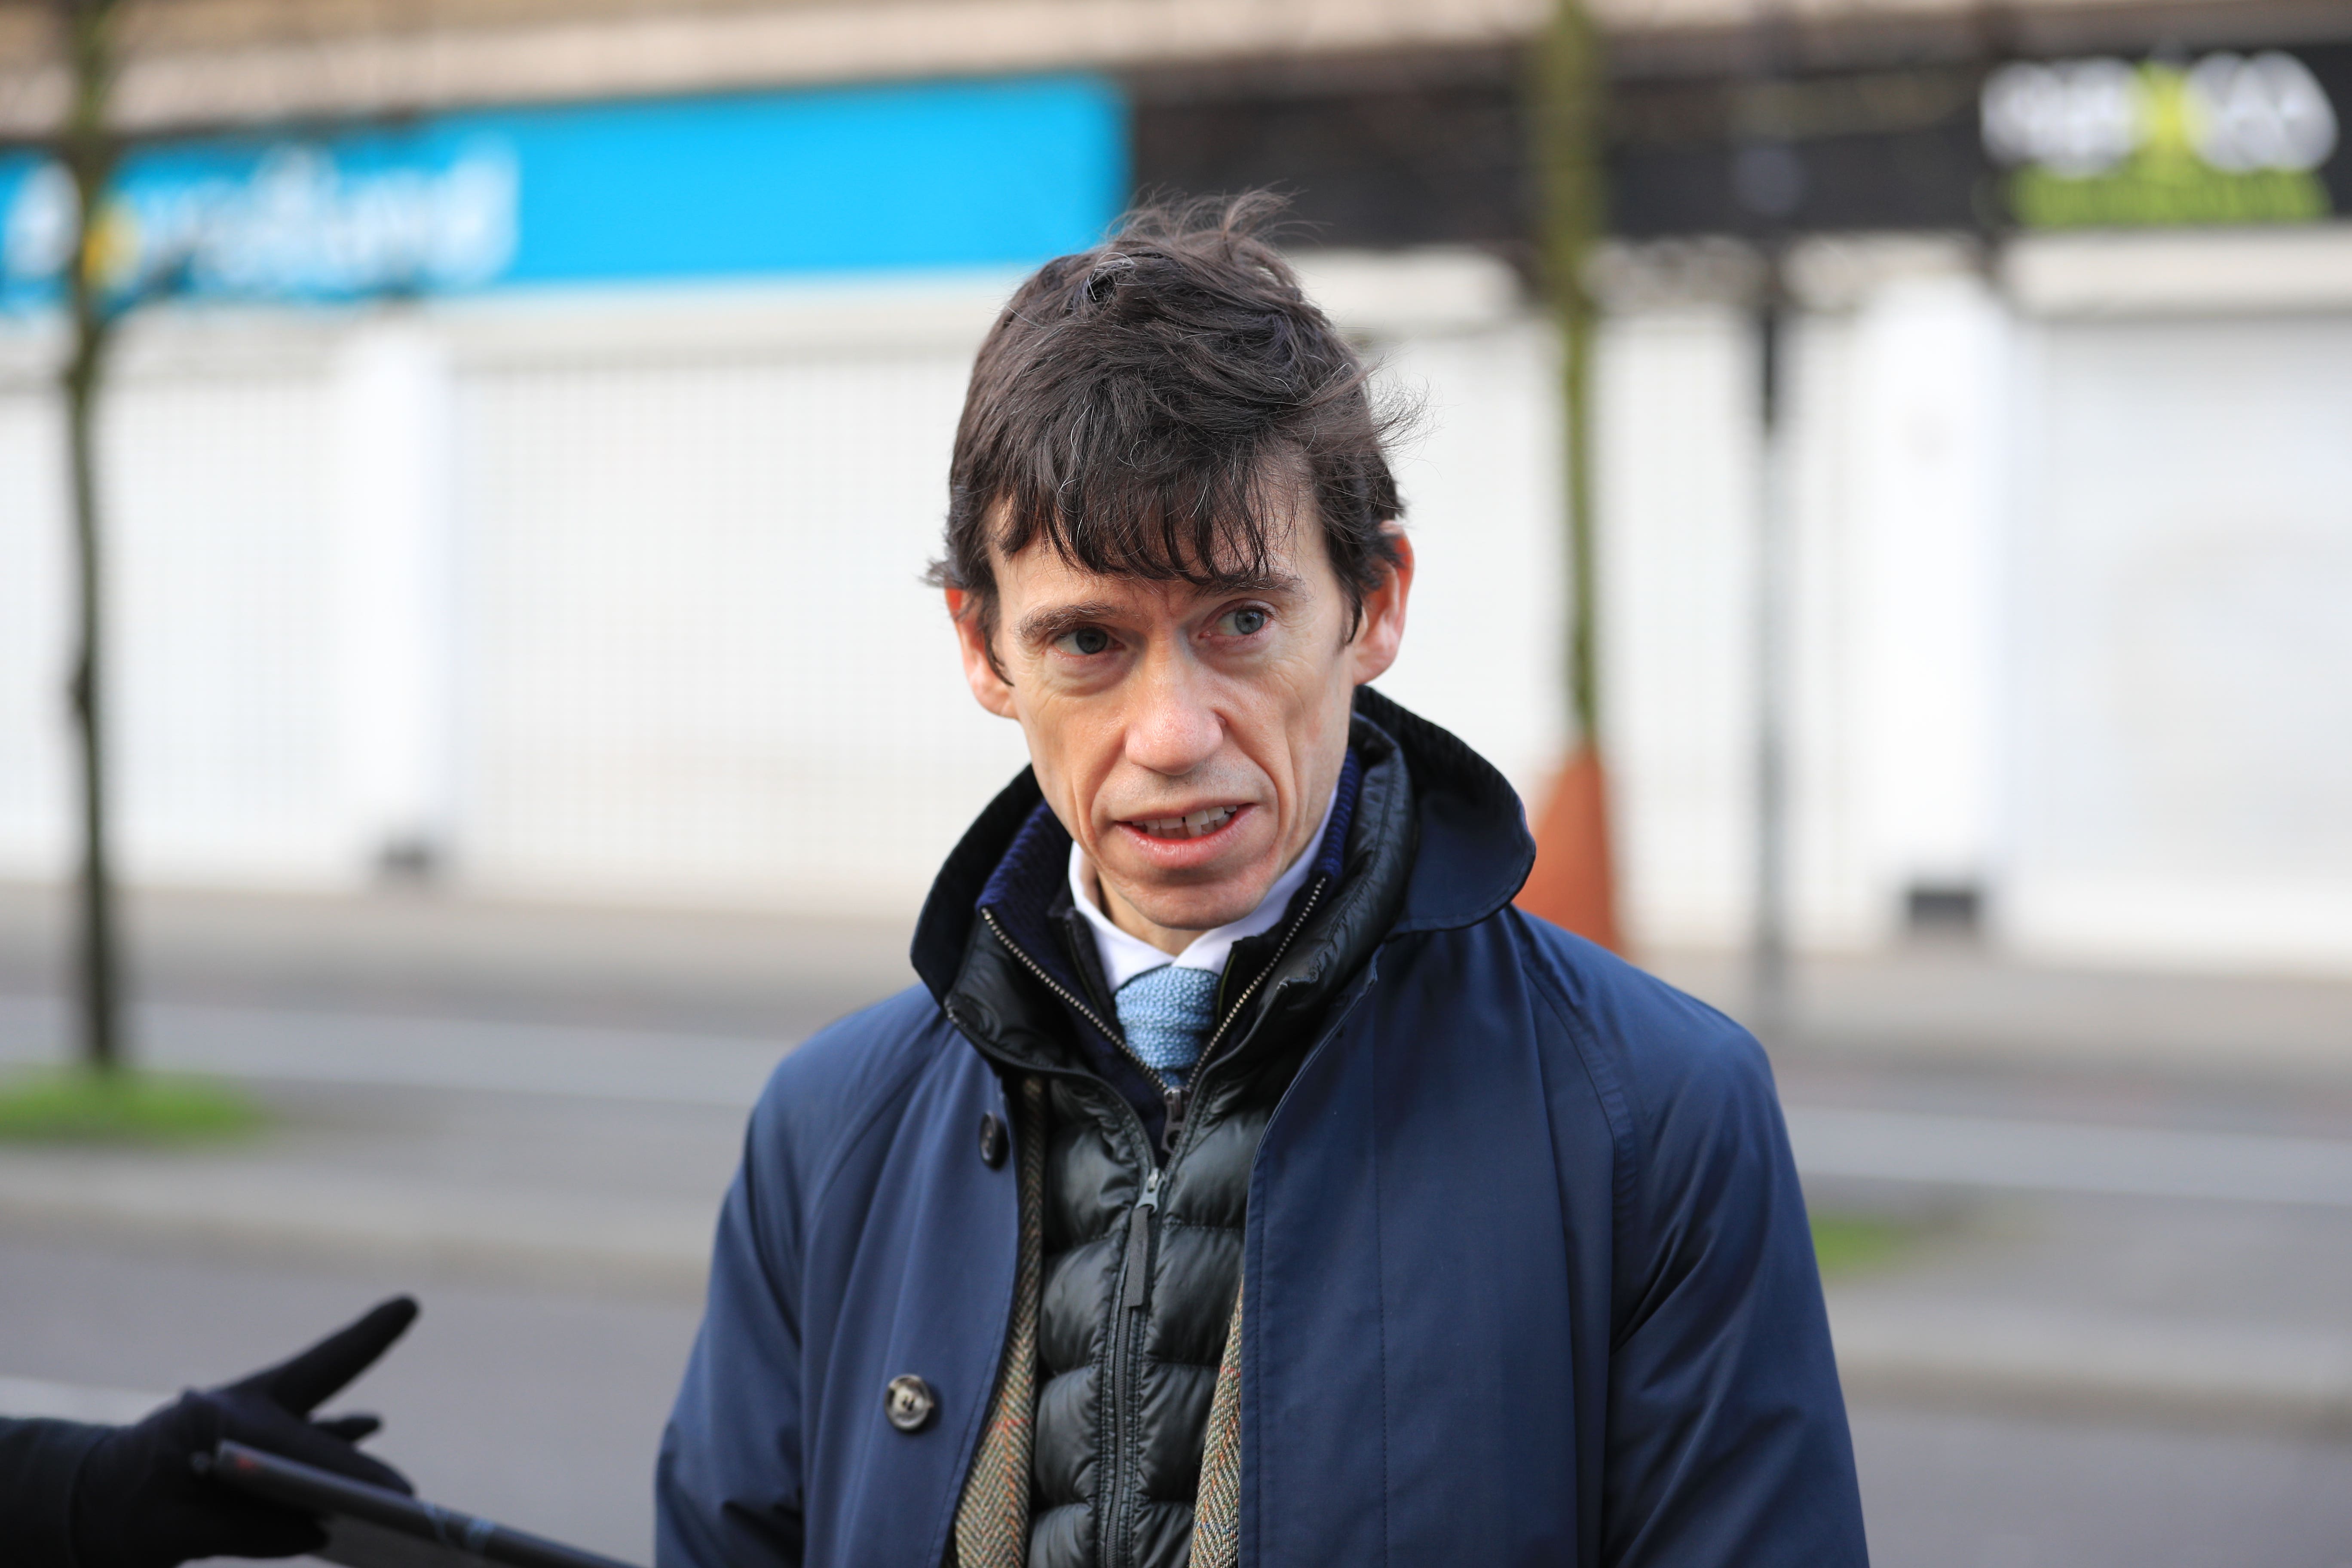 Former Conservative minister Rory Stewart has spoken about mental health issues among MPs